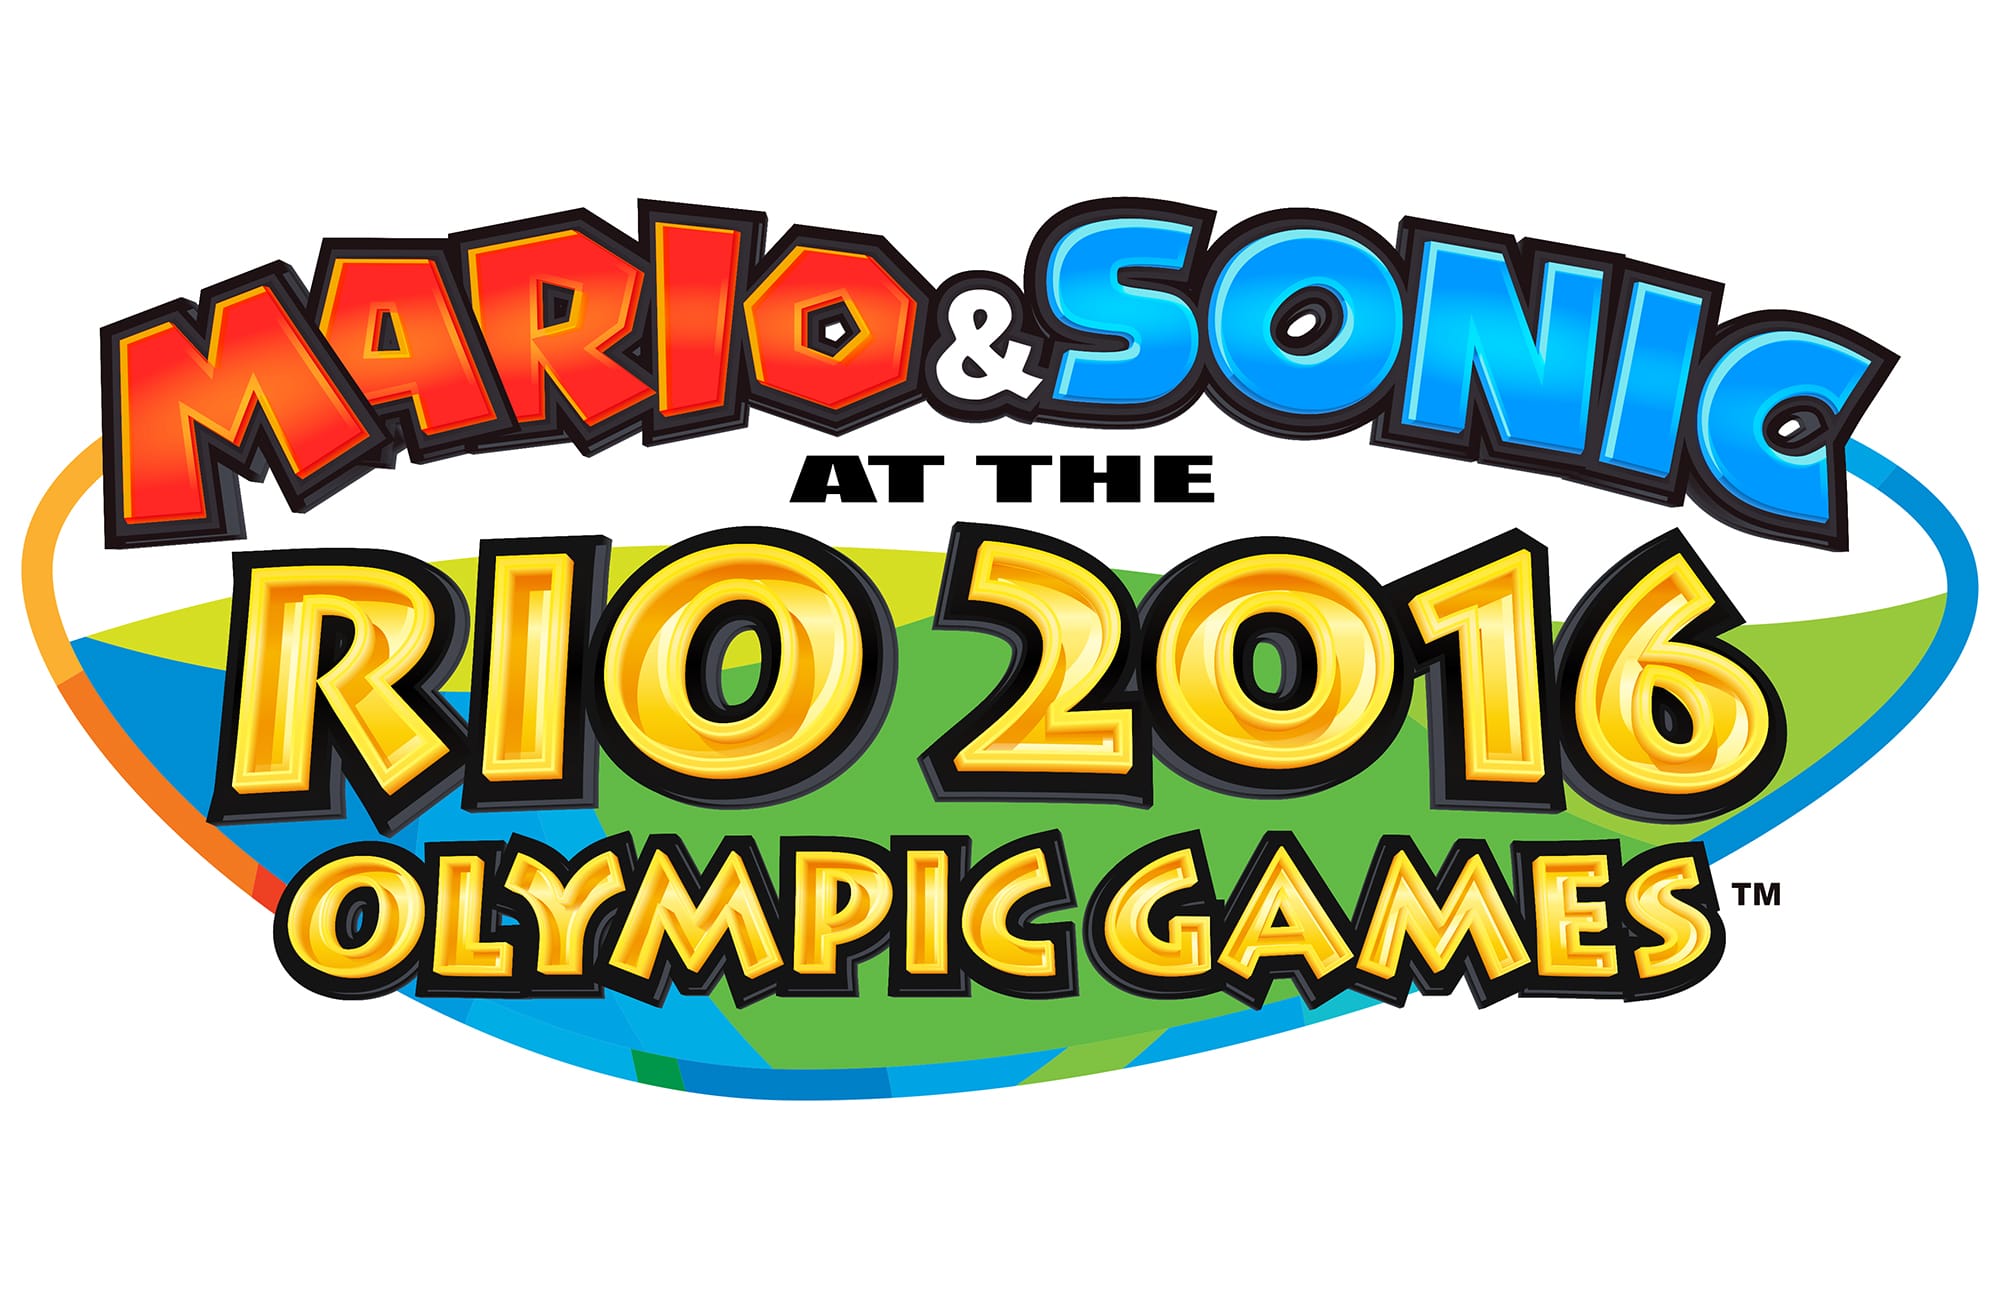 Mario & Sonic at the Rio Olympic Games logo